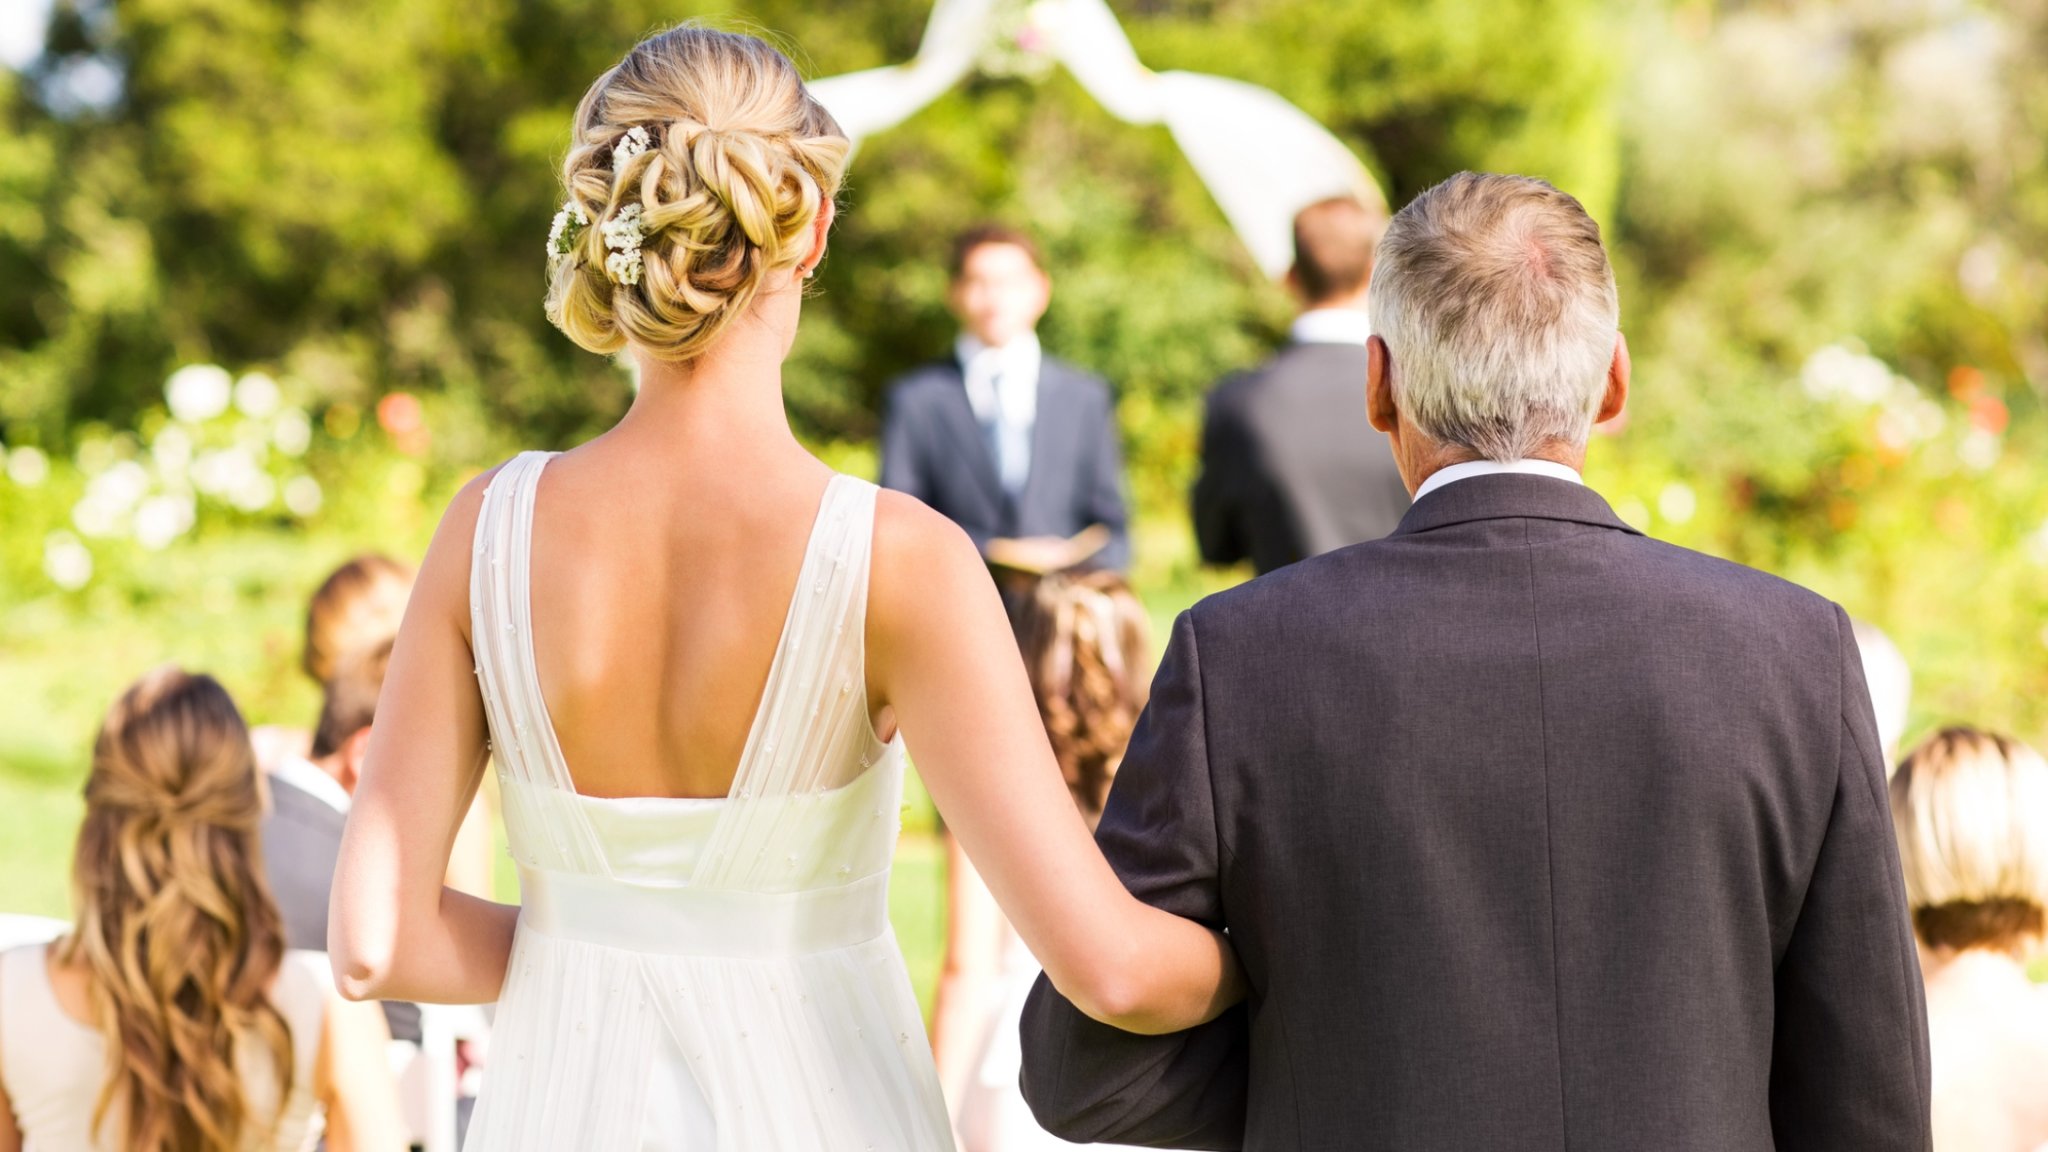 Dad Misses His Daughter's Wedding Because Her Stepsister Got Married The Same Weekend